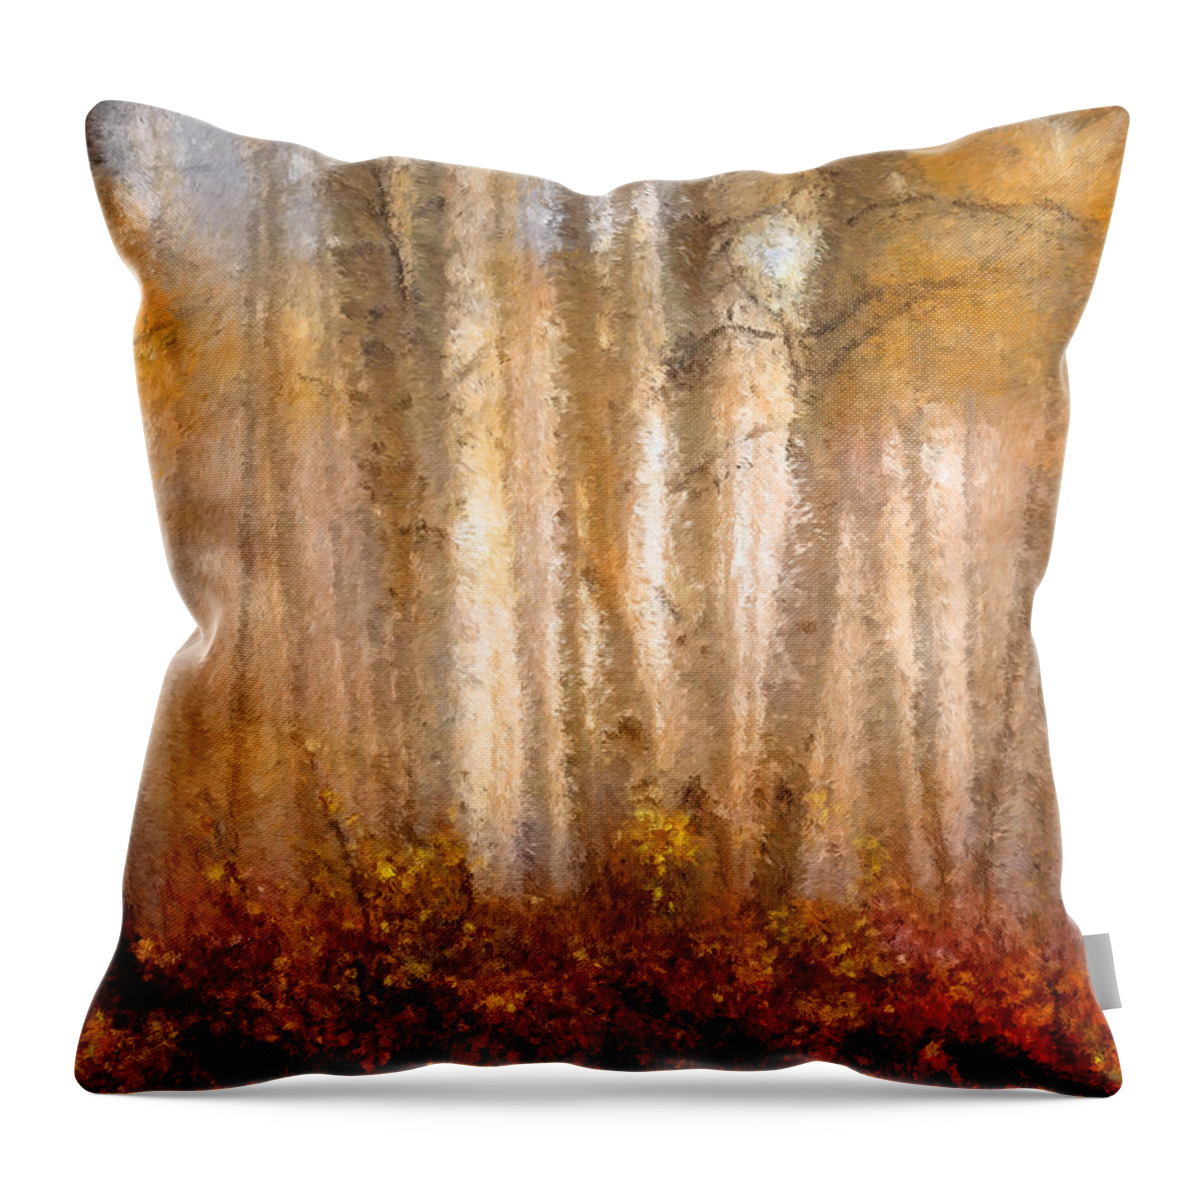 Trees Throw Pillow featuring the painting Trees by Vart Studio